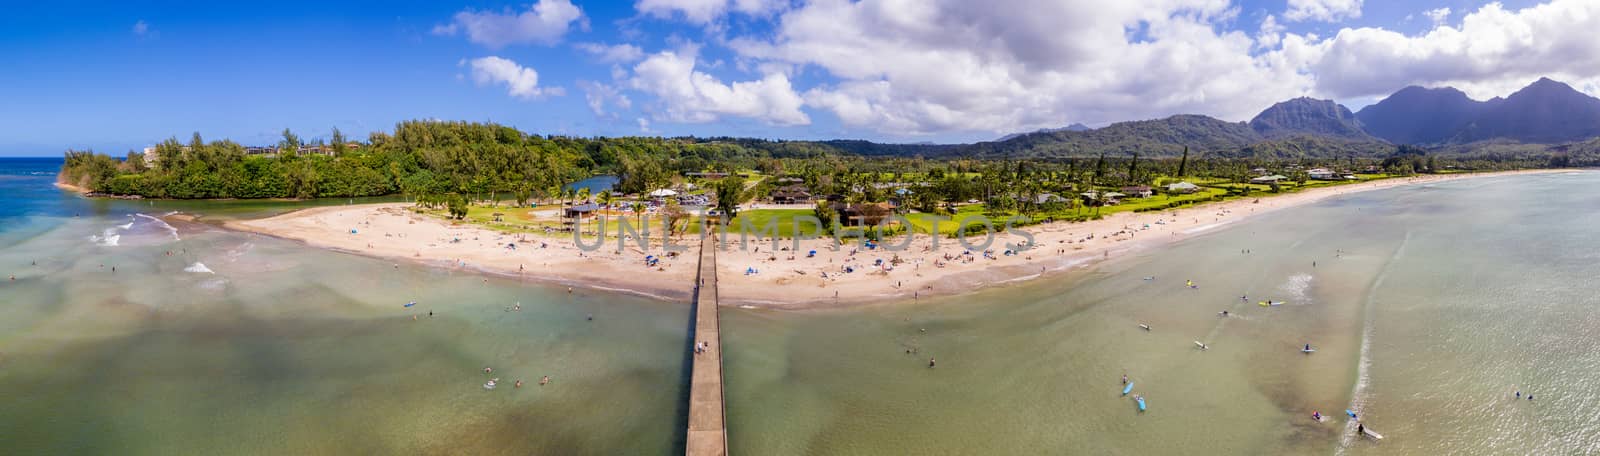 Aerial drone shot of Hanalei bay and beach on the north shore of Kauai in Hawaii by steheap